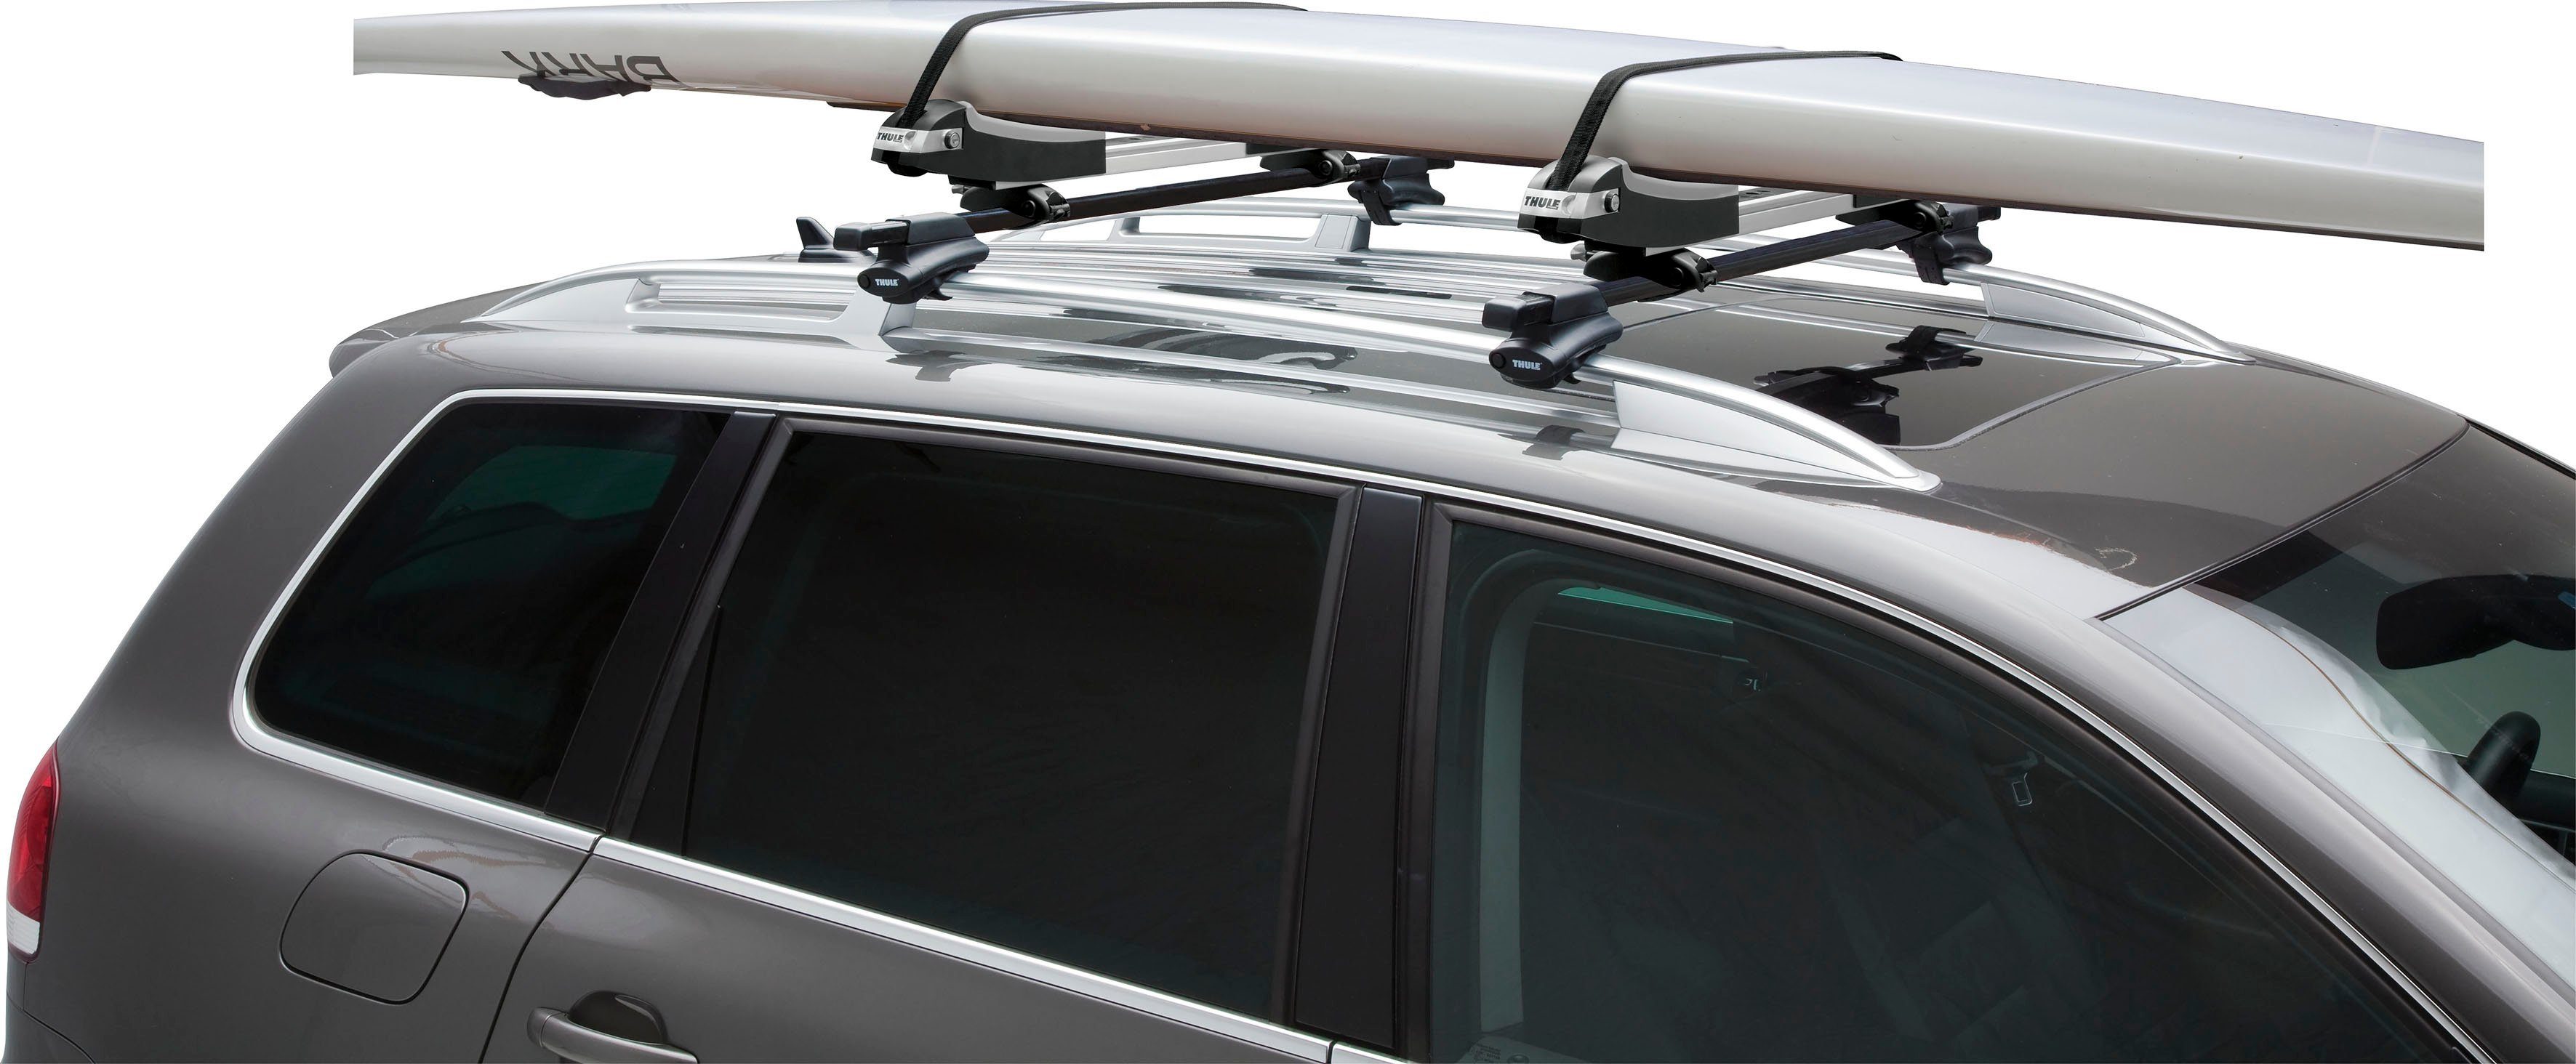 Dachträger für XT, Thule Taxi SUP SUP-Boards